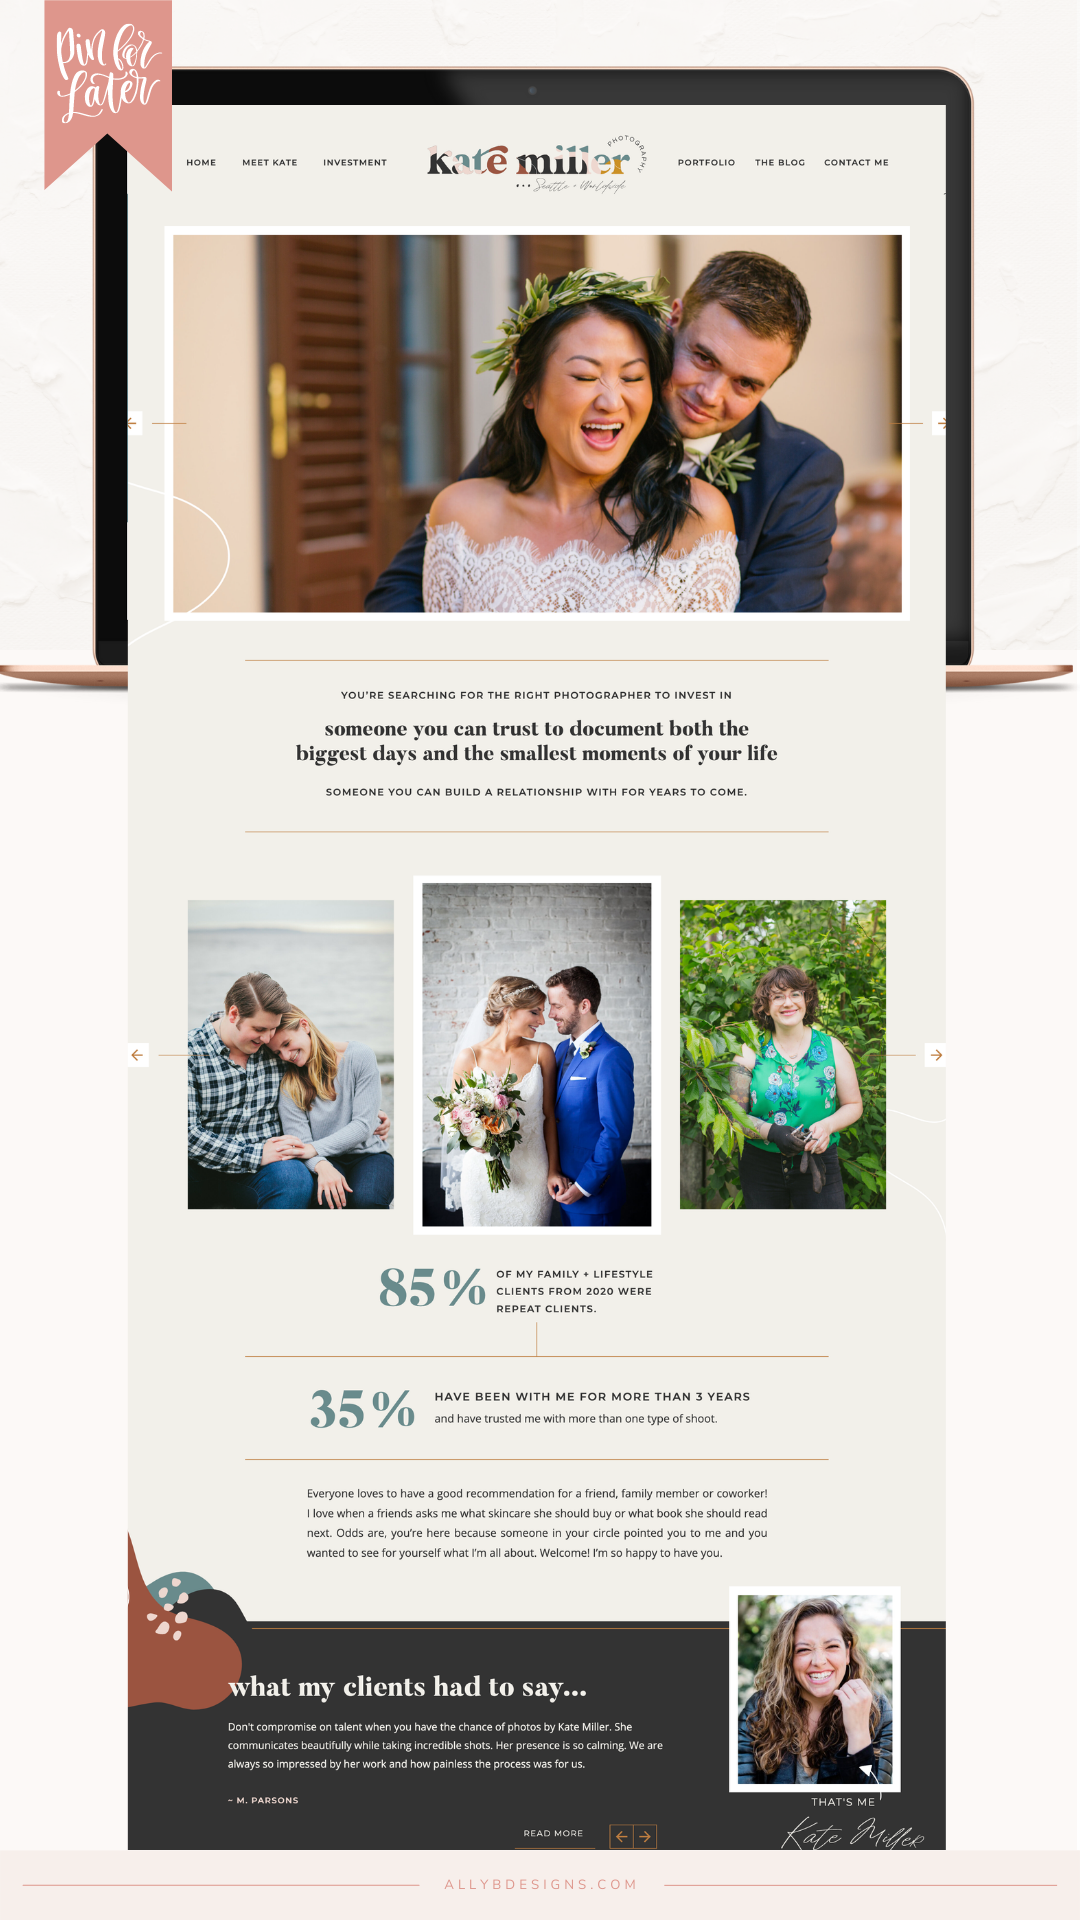 Client Launch: A Wedding Photographer Website and Brand for Kate Miller Photography by Ally B Designs